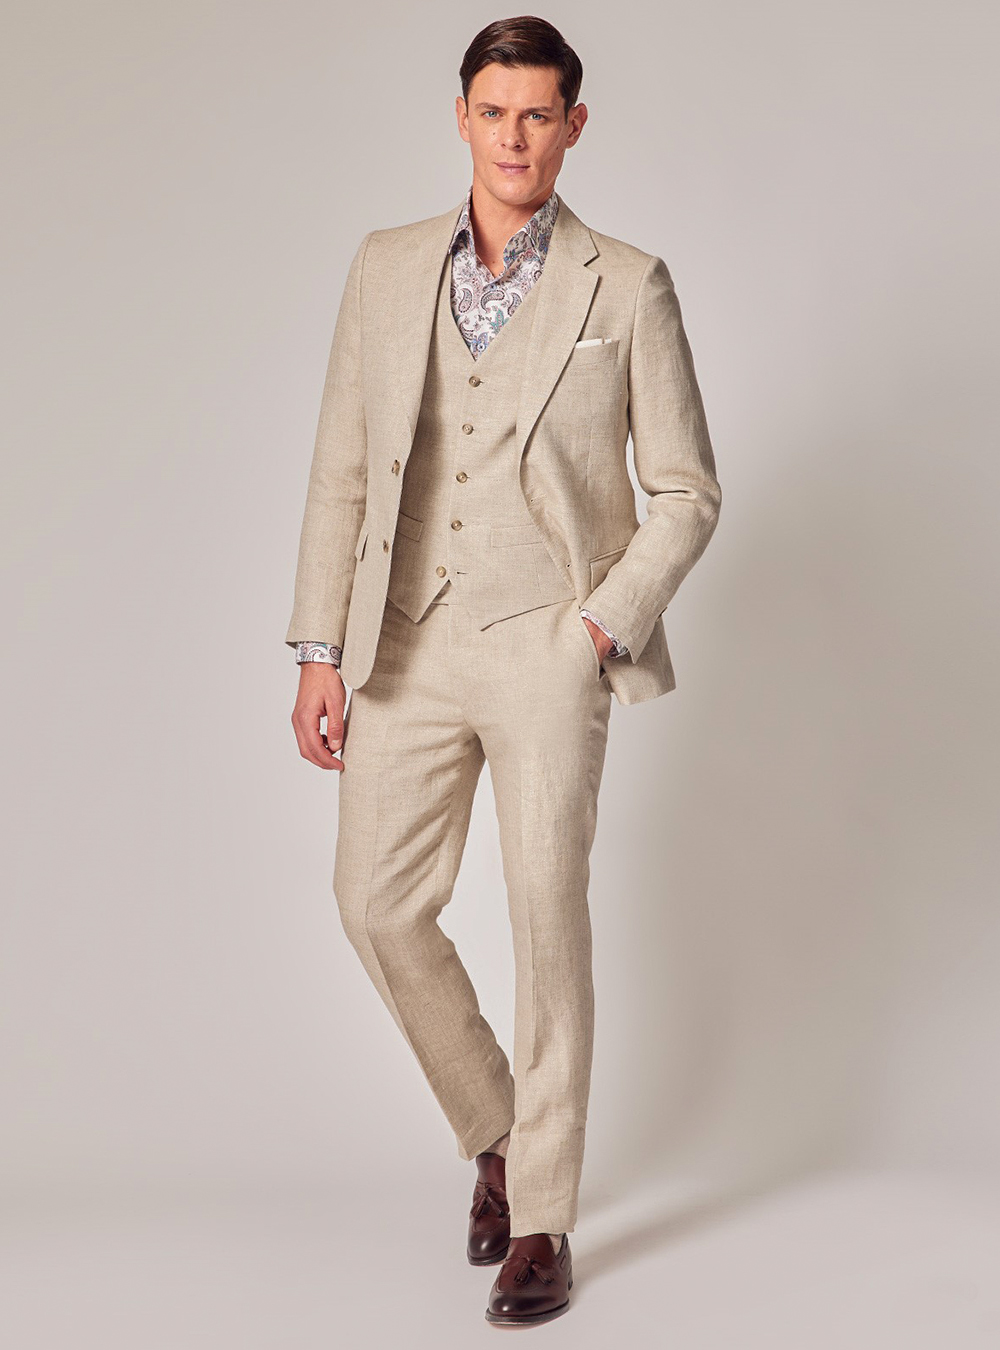 Beige three-piece suit, floral dress shirt and burgundy tassel loafers